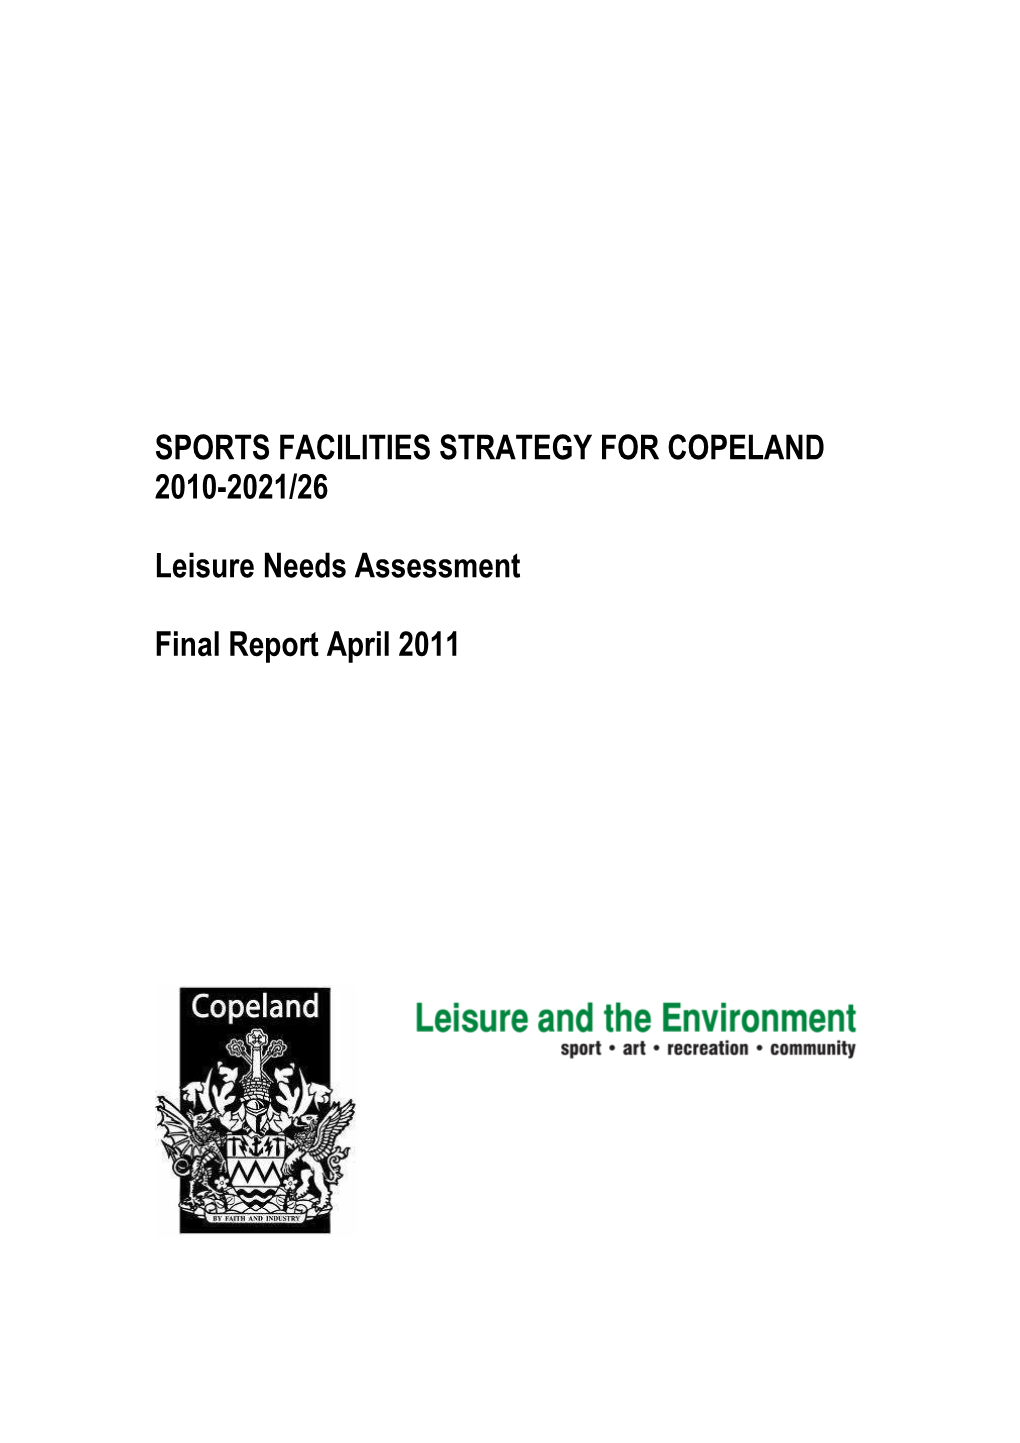 Sports Facilities Strategy for Copeland 2010-2021/26